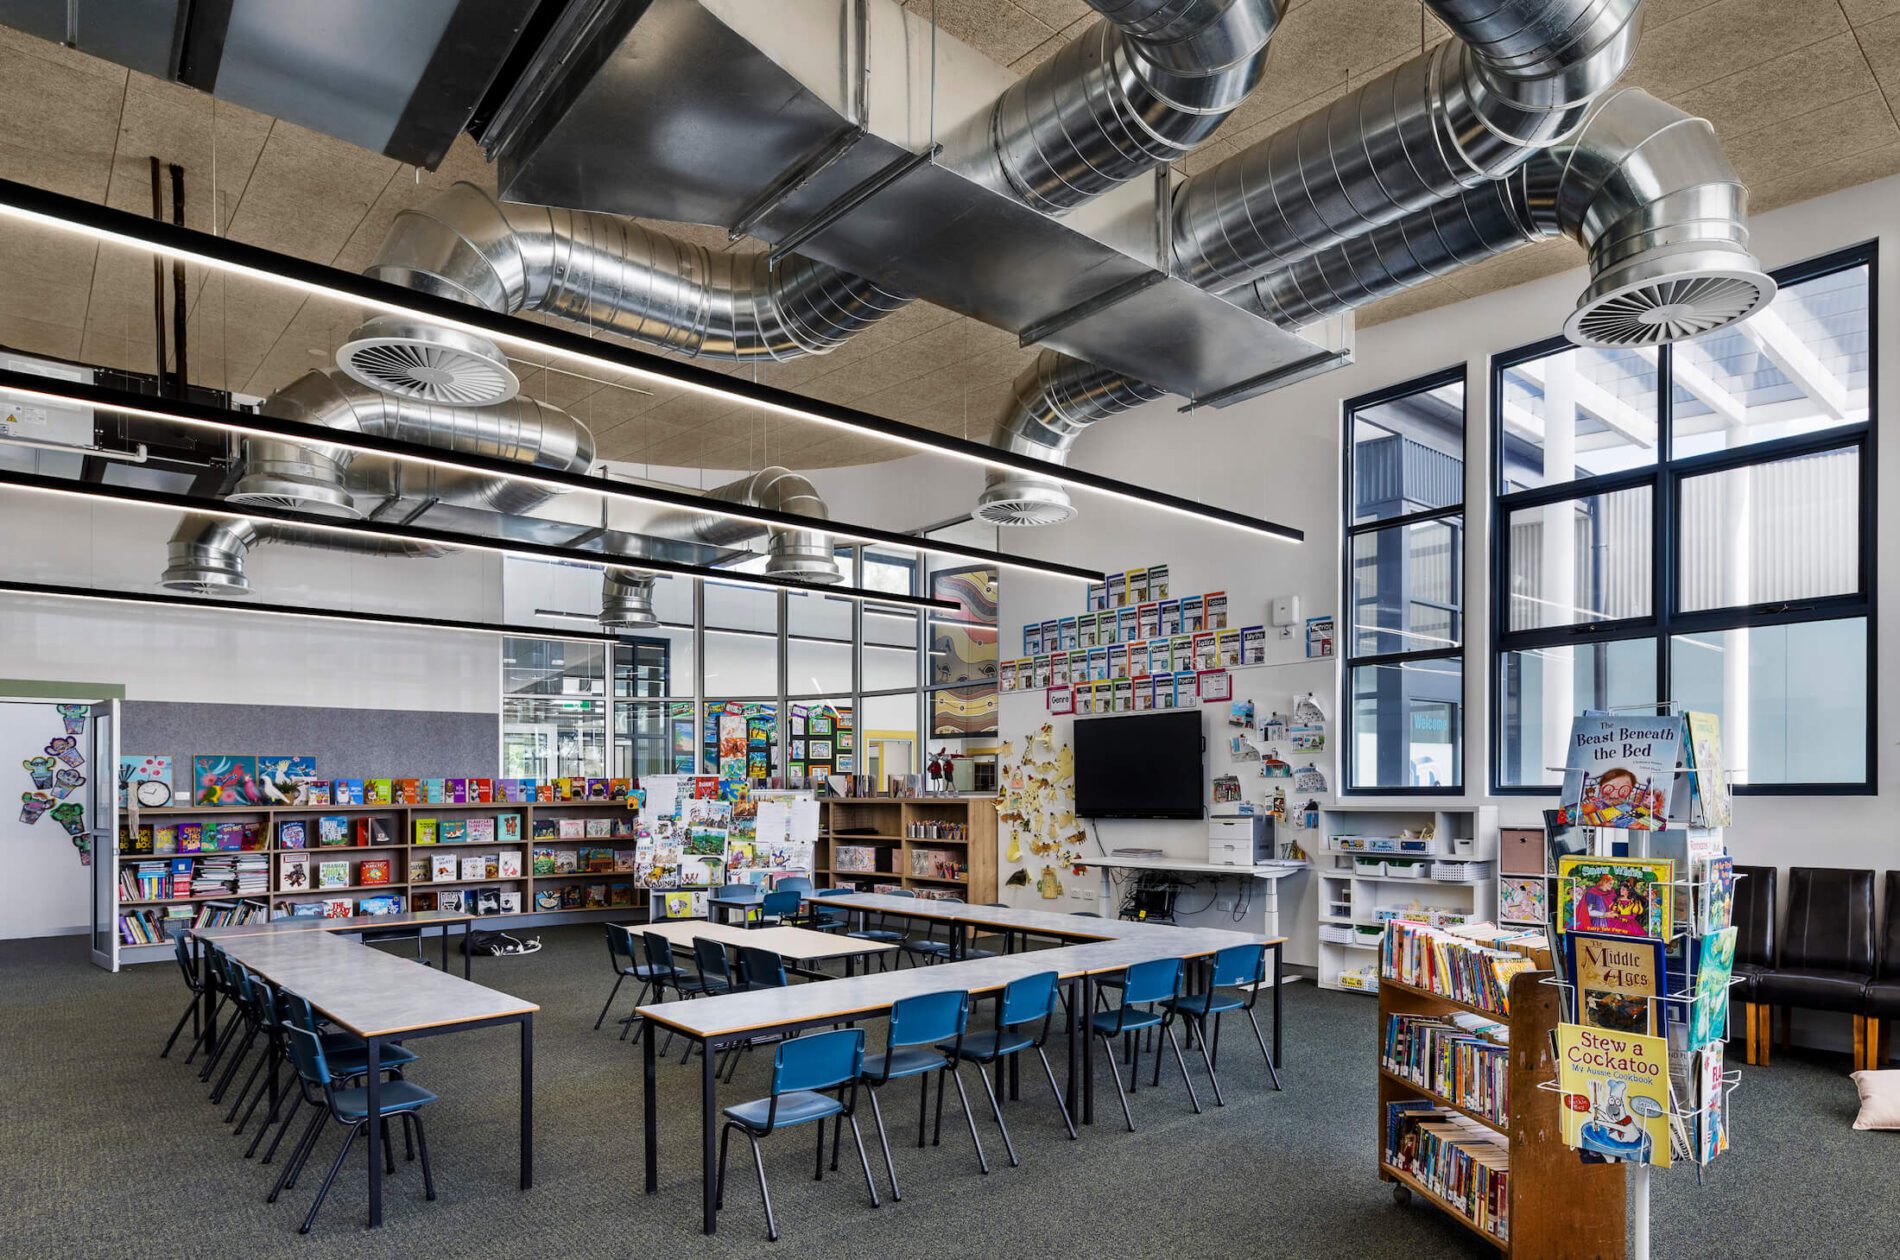 School library with bookshelves and desks arranged in square. Ducted ventilation above.